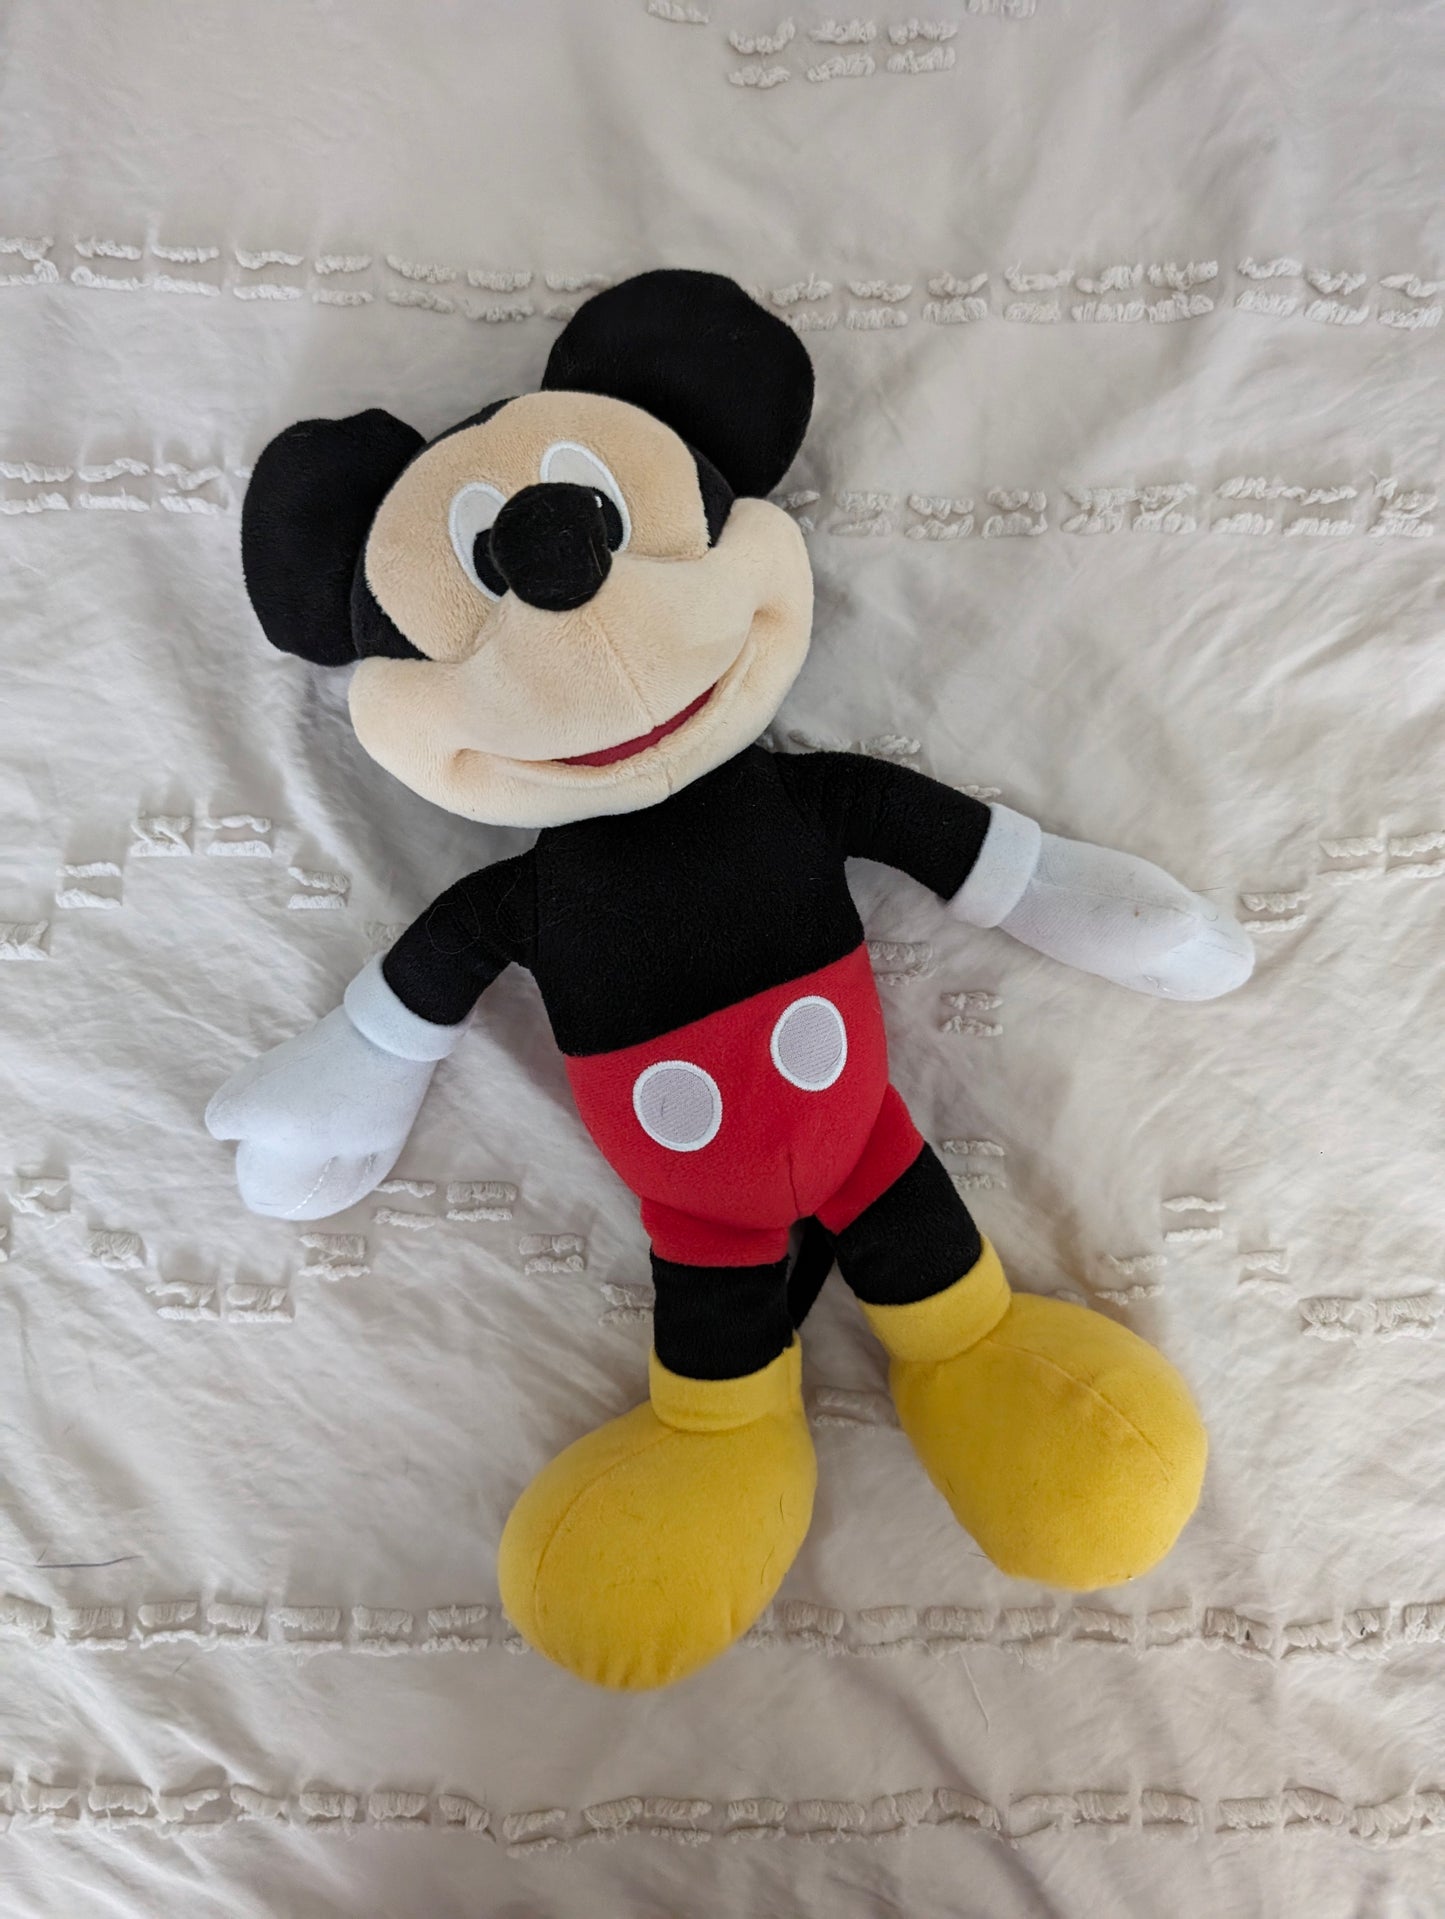 Mickey mouse plush (sings Hot dog!)